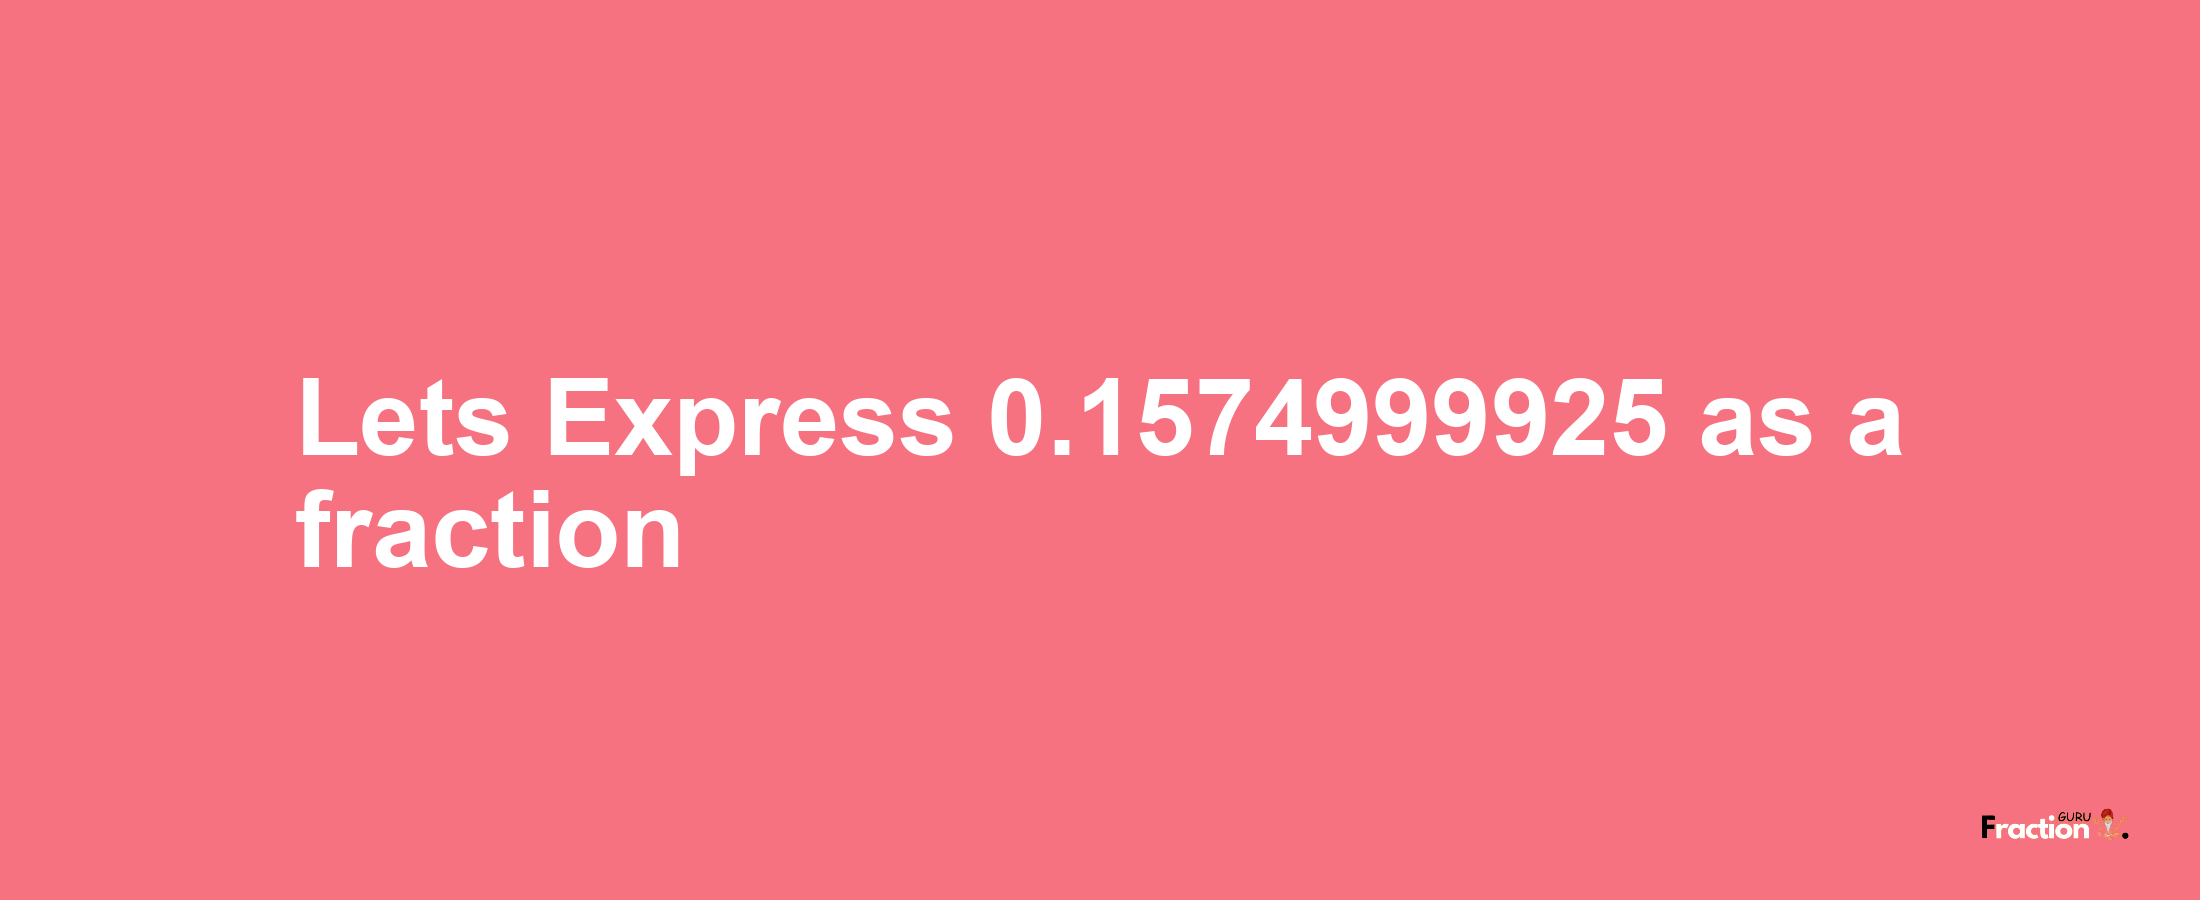 Lets Express 0.1574999925 as afraction